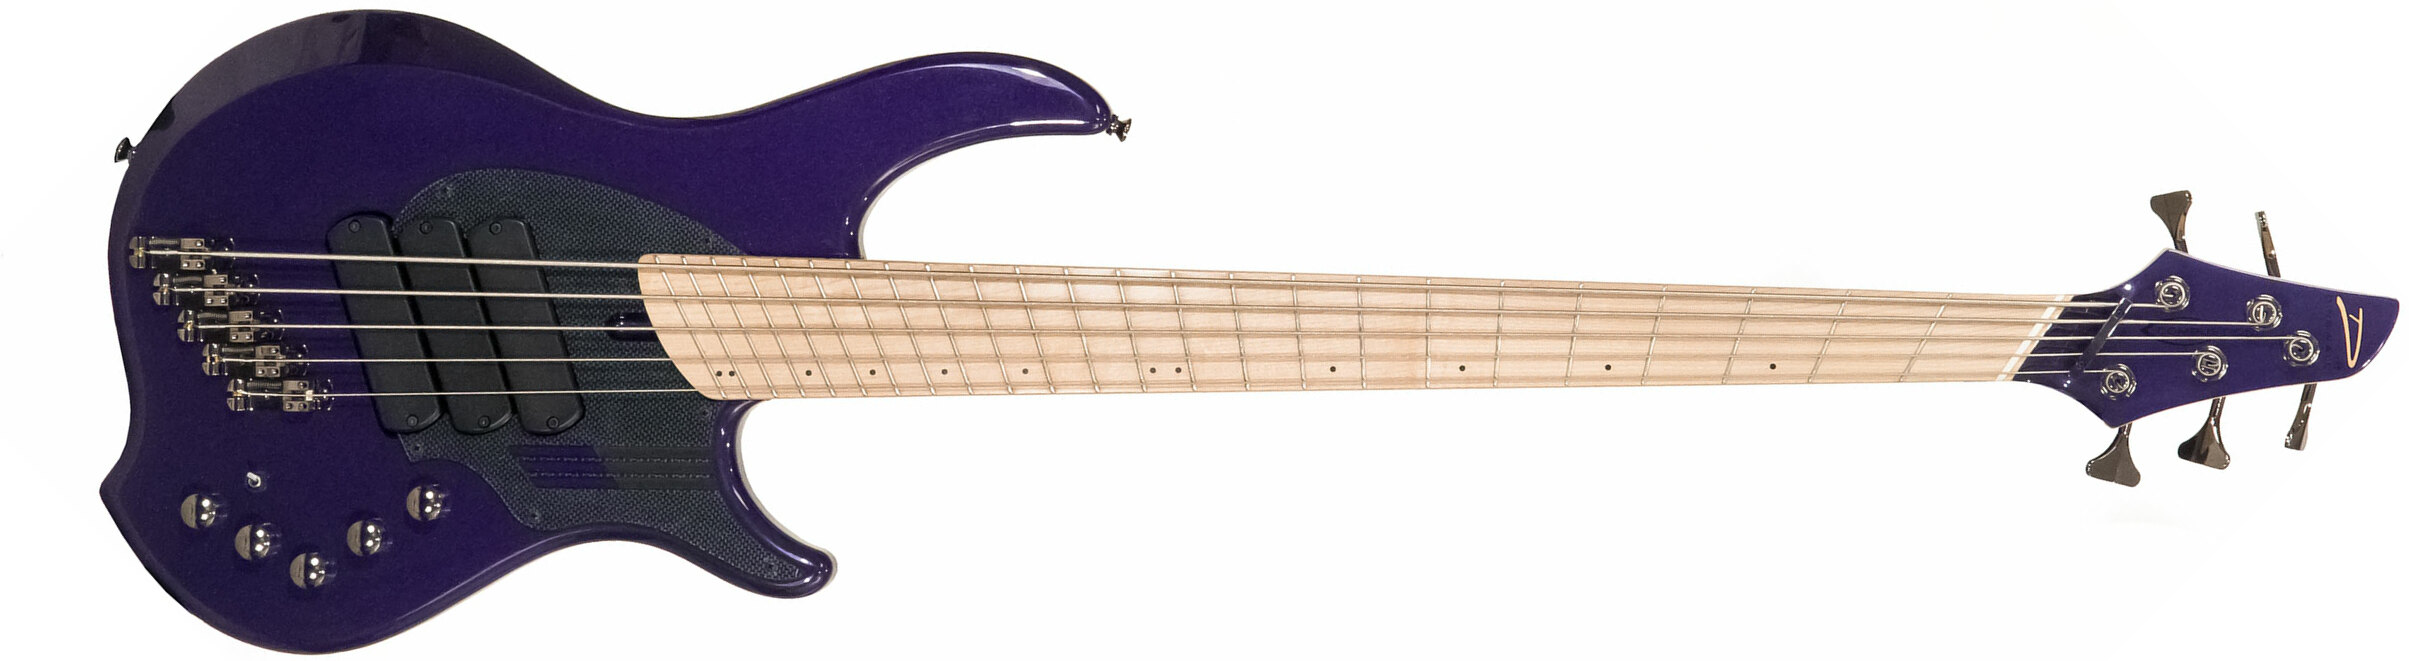 Dingwall Adam Nolly Getgood Ng3 5c Signature 3pu Active Mn - Purple Metallic - Solid body electric bass - Main picture